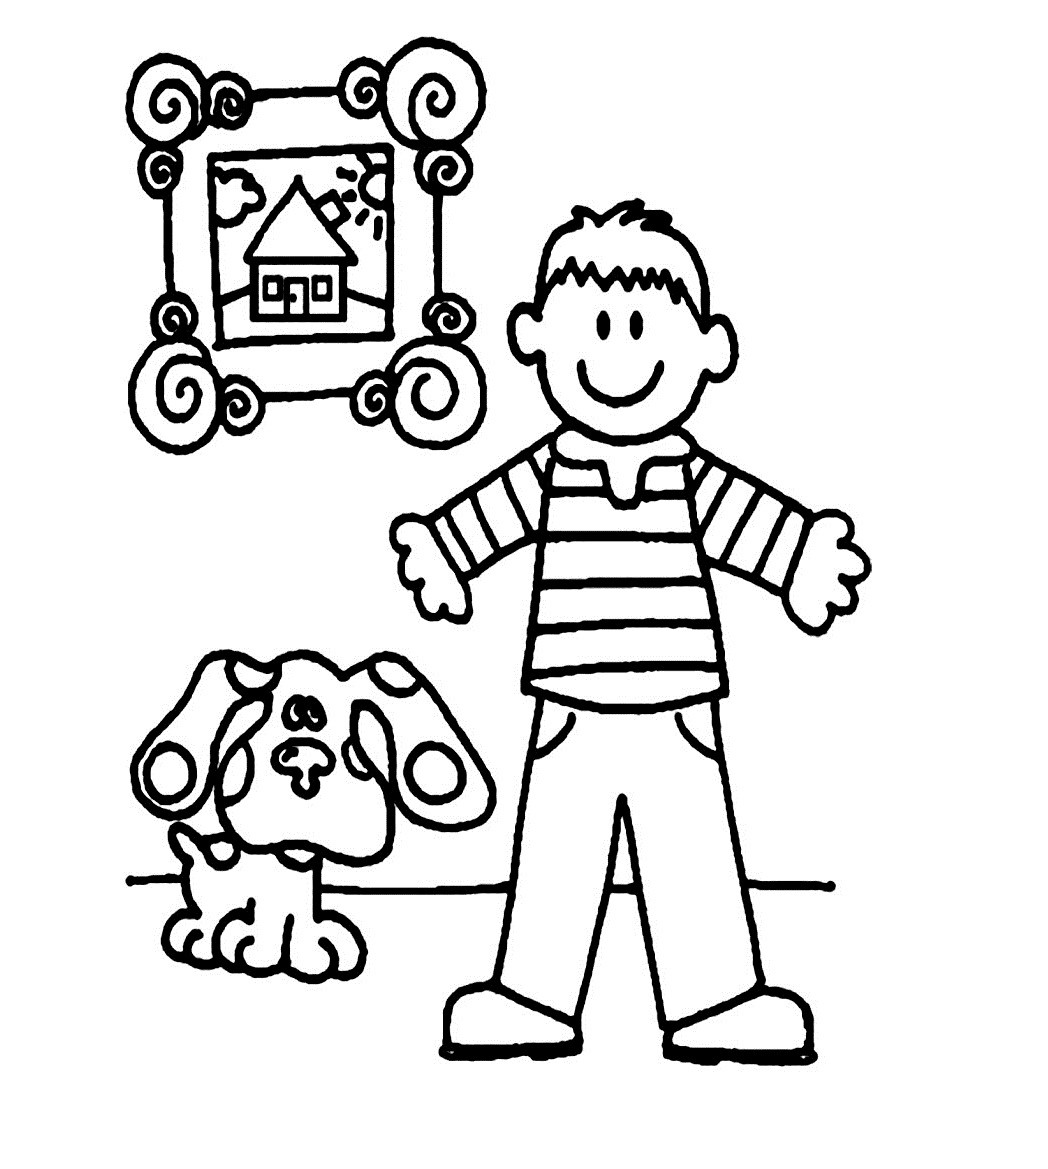 Kids Coloring Pages For Boys
 Free Printable Boy Coloring Pages For Kids